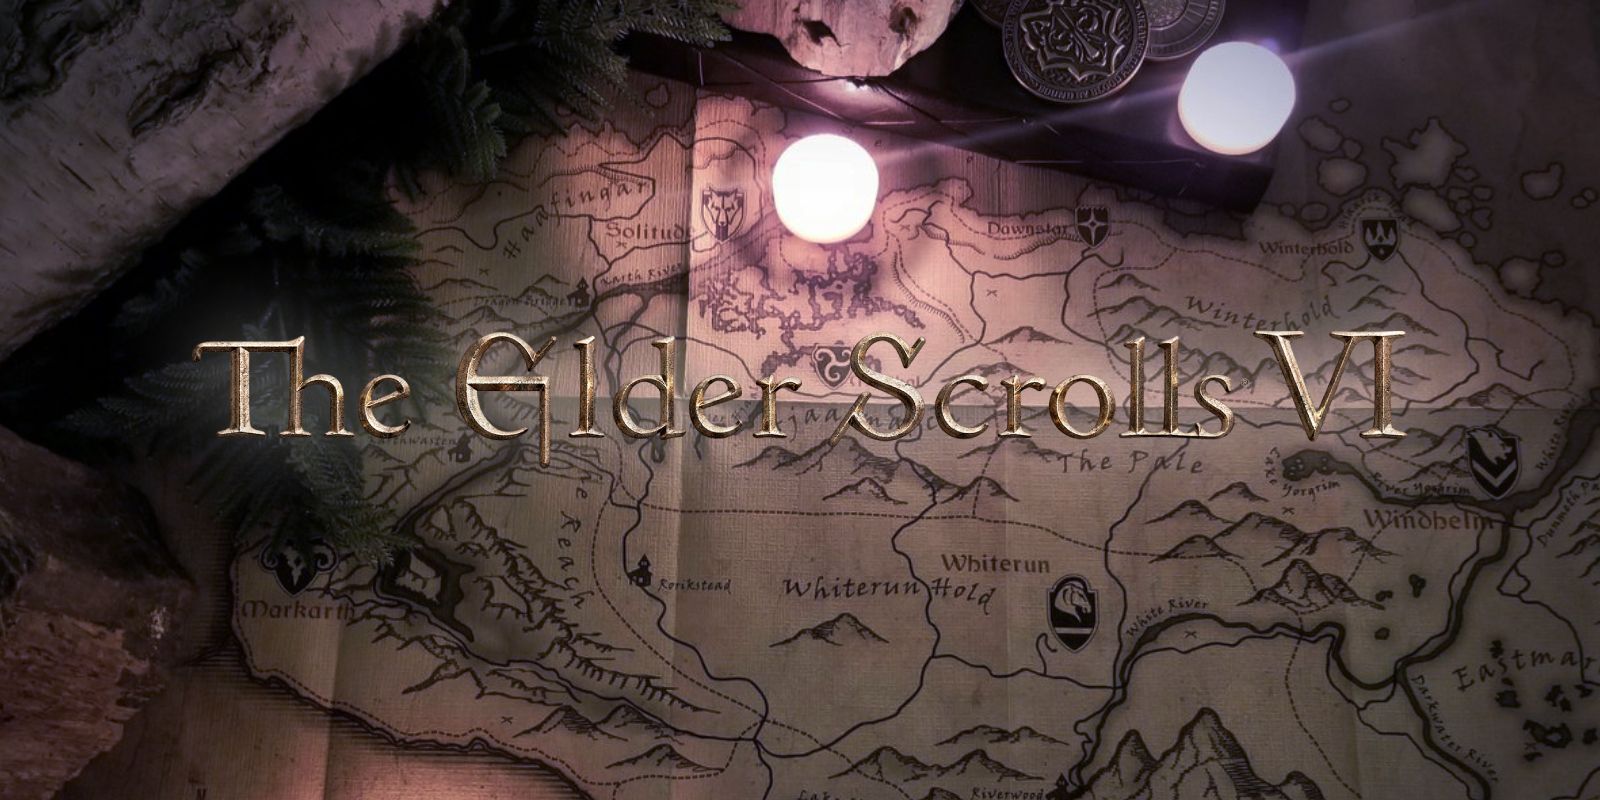 The Elder Scrolls 6 Release Date, Trailer, Gameplay and Other Details